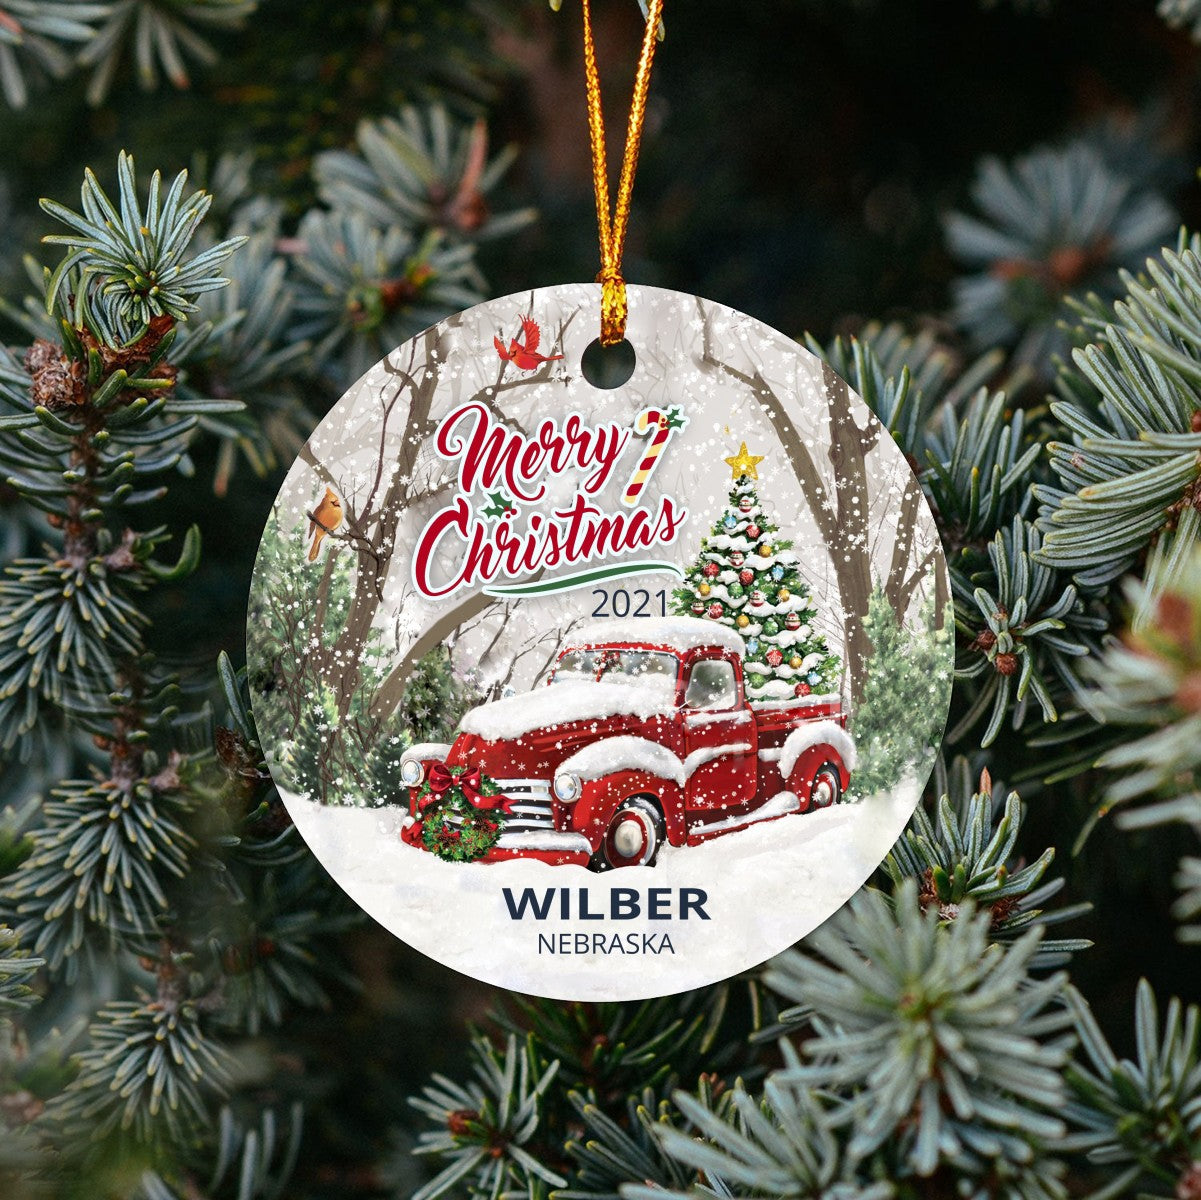 Christmas Tree Ornaments Wilber - Ornament With Name City, State Wilber Nebraska NE Ornament - Red Truck Xmas Ornaments 3'' Plastic Gift For Family, Friend And Housewarming